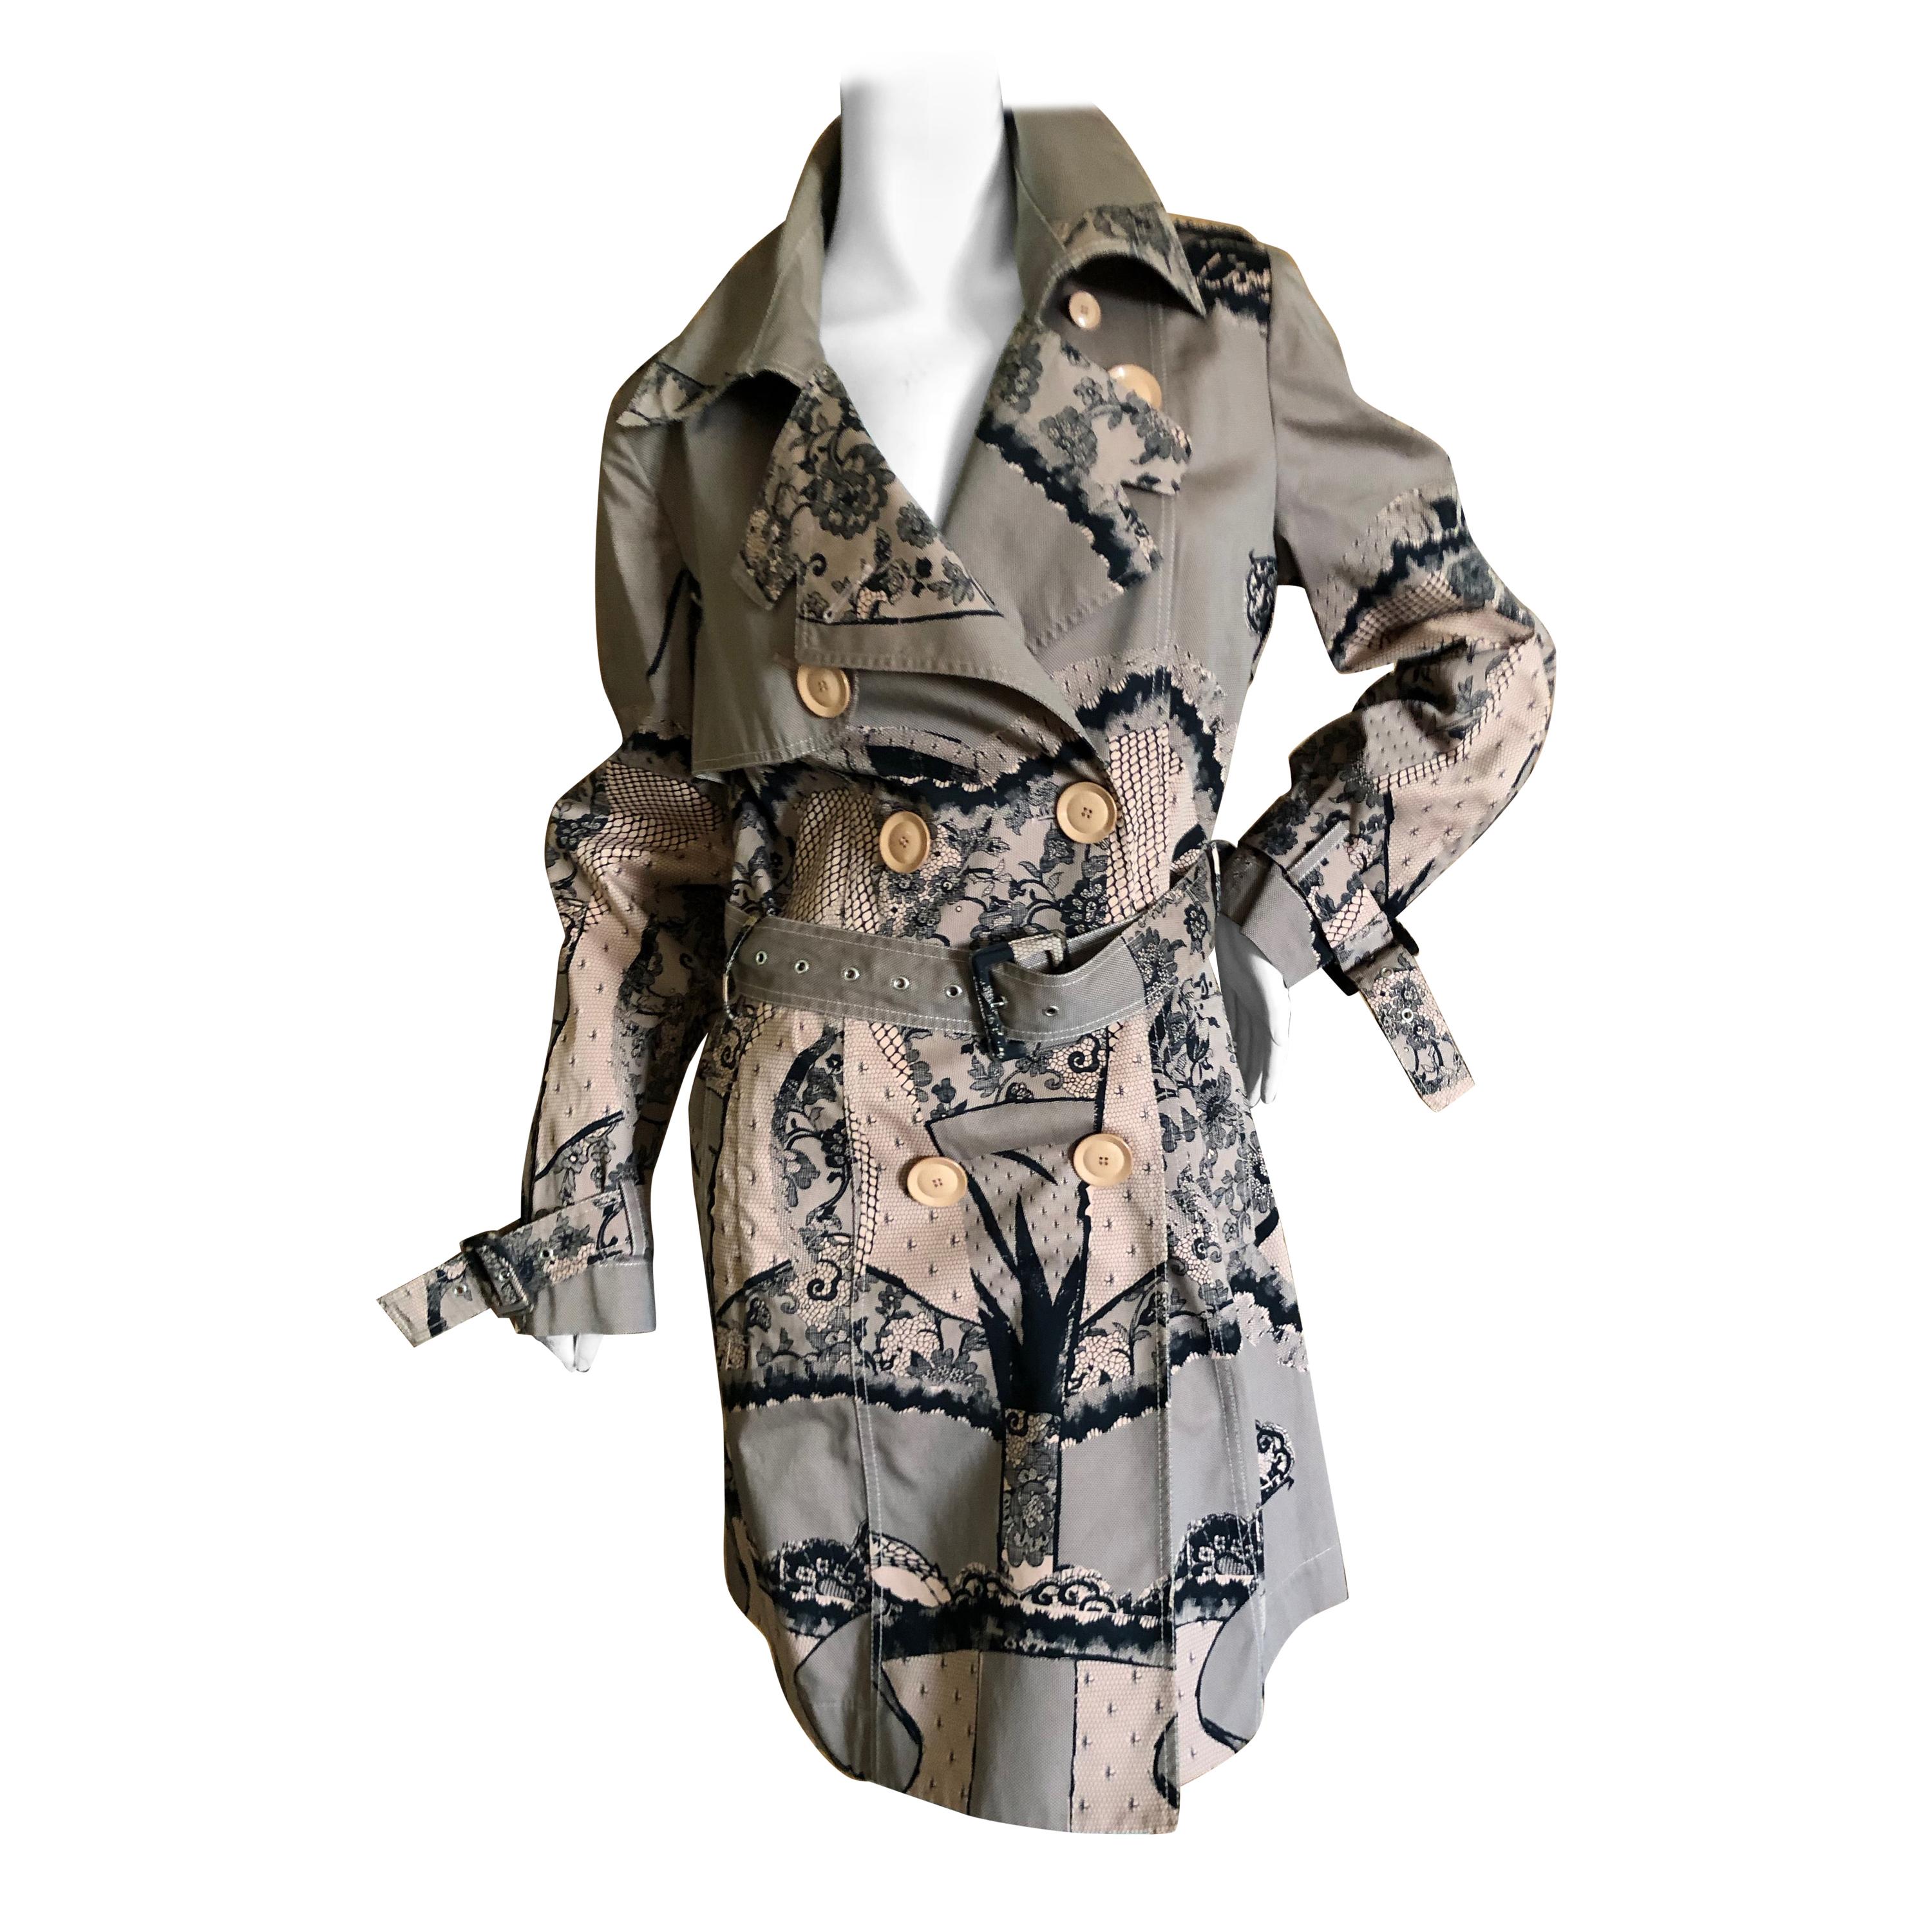  Dior by John Galliano Spring 2006 "Dior Nude" Collection Tromp l'oeil Lace Coat For Sale